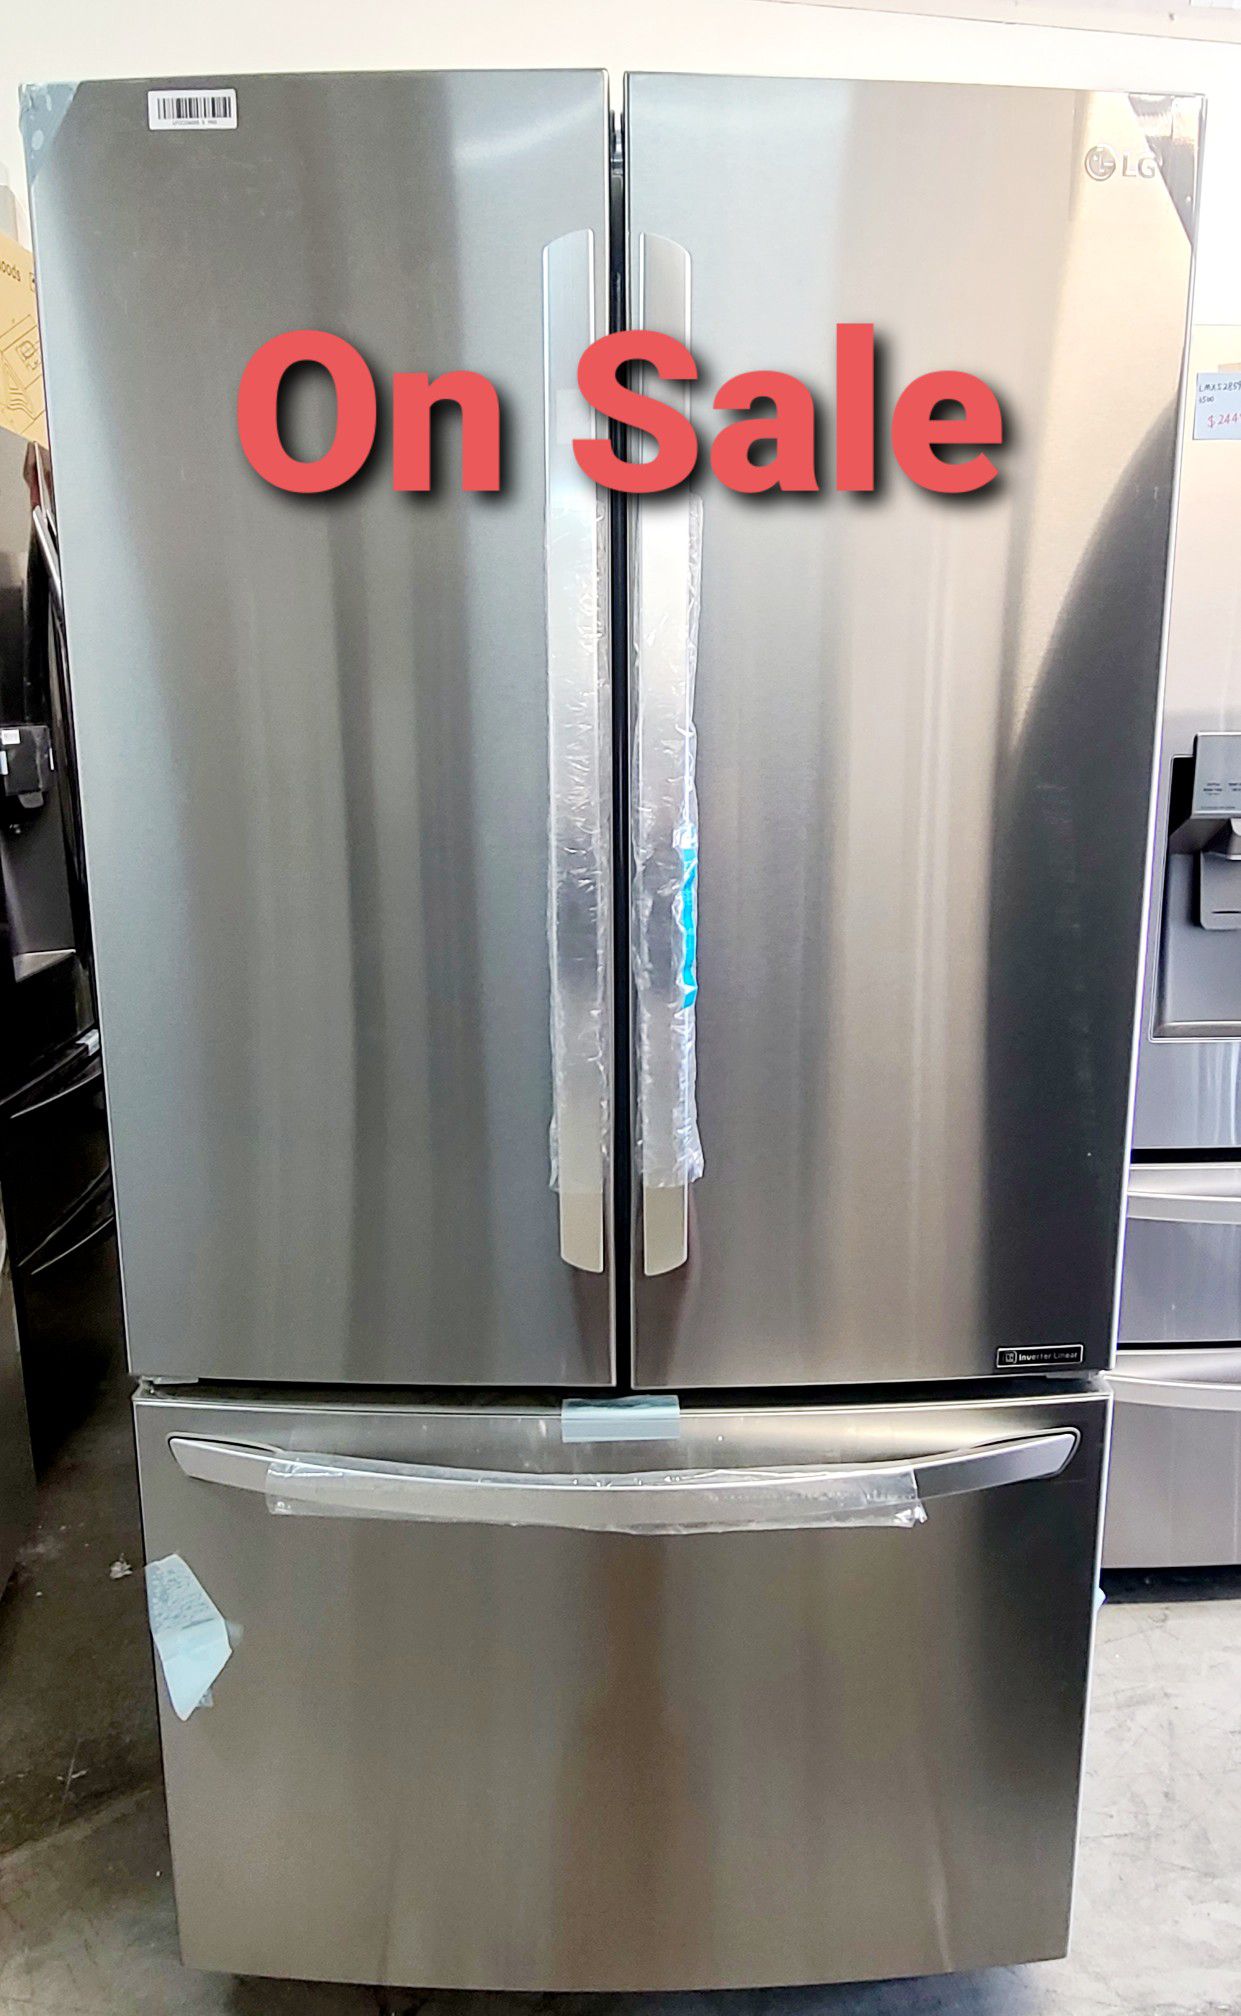 $50 Down, take New Refrigerator home today. 23 cu. ft. French Door Counter-Depth